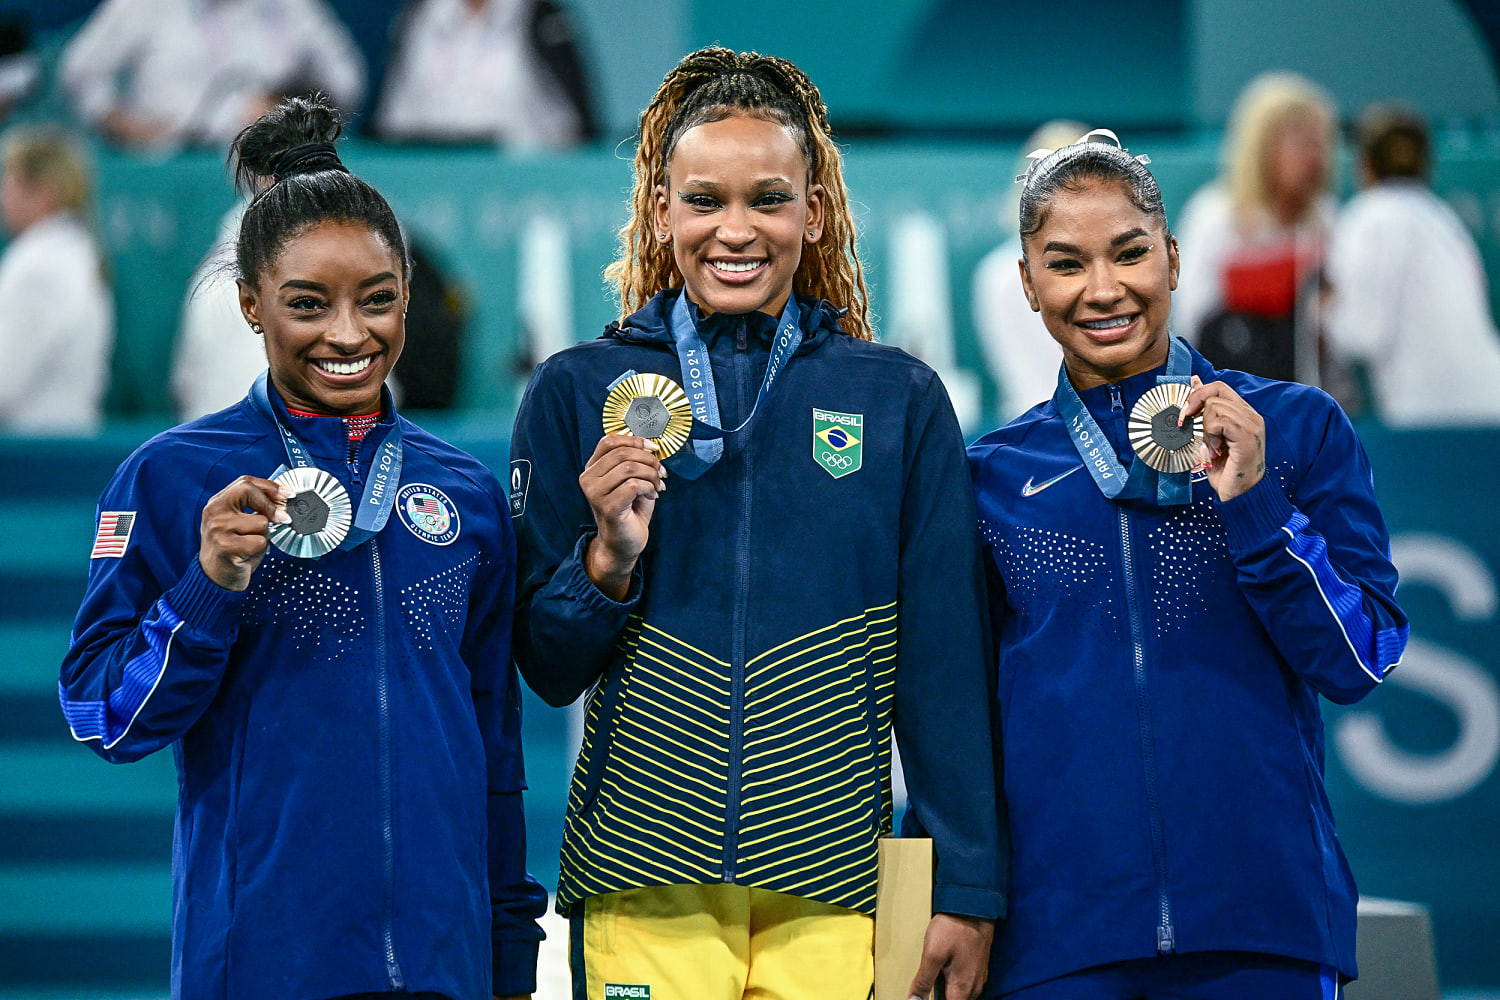 Olympics recap: What you missed in gymnastics, track and field, soccer and more